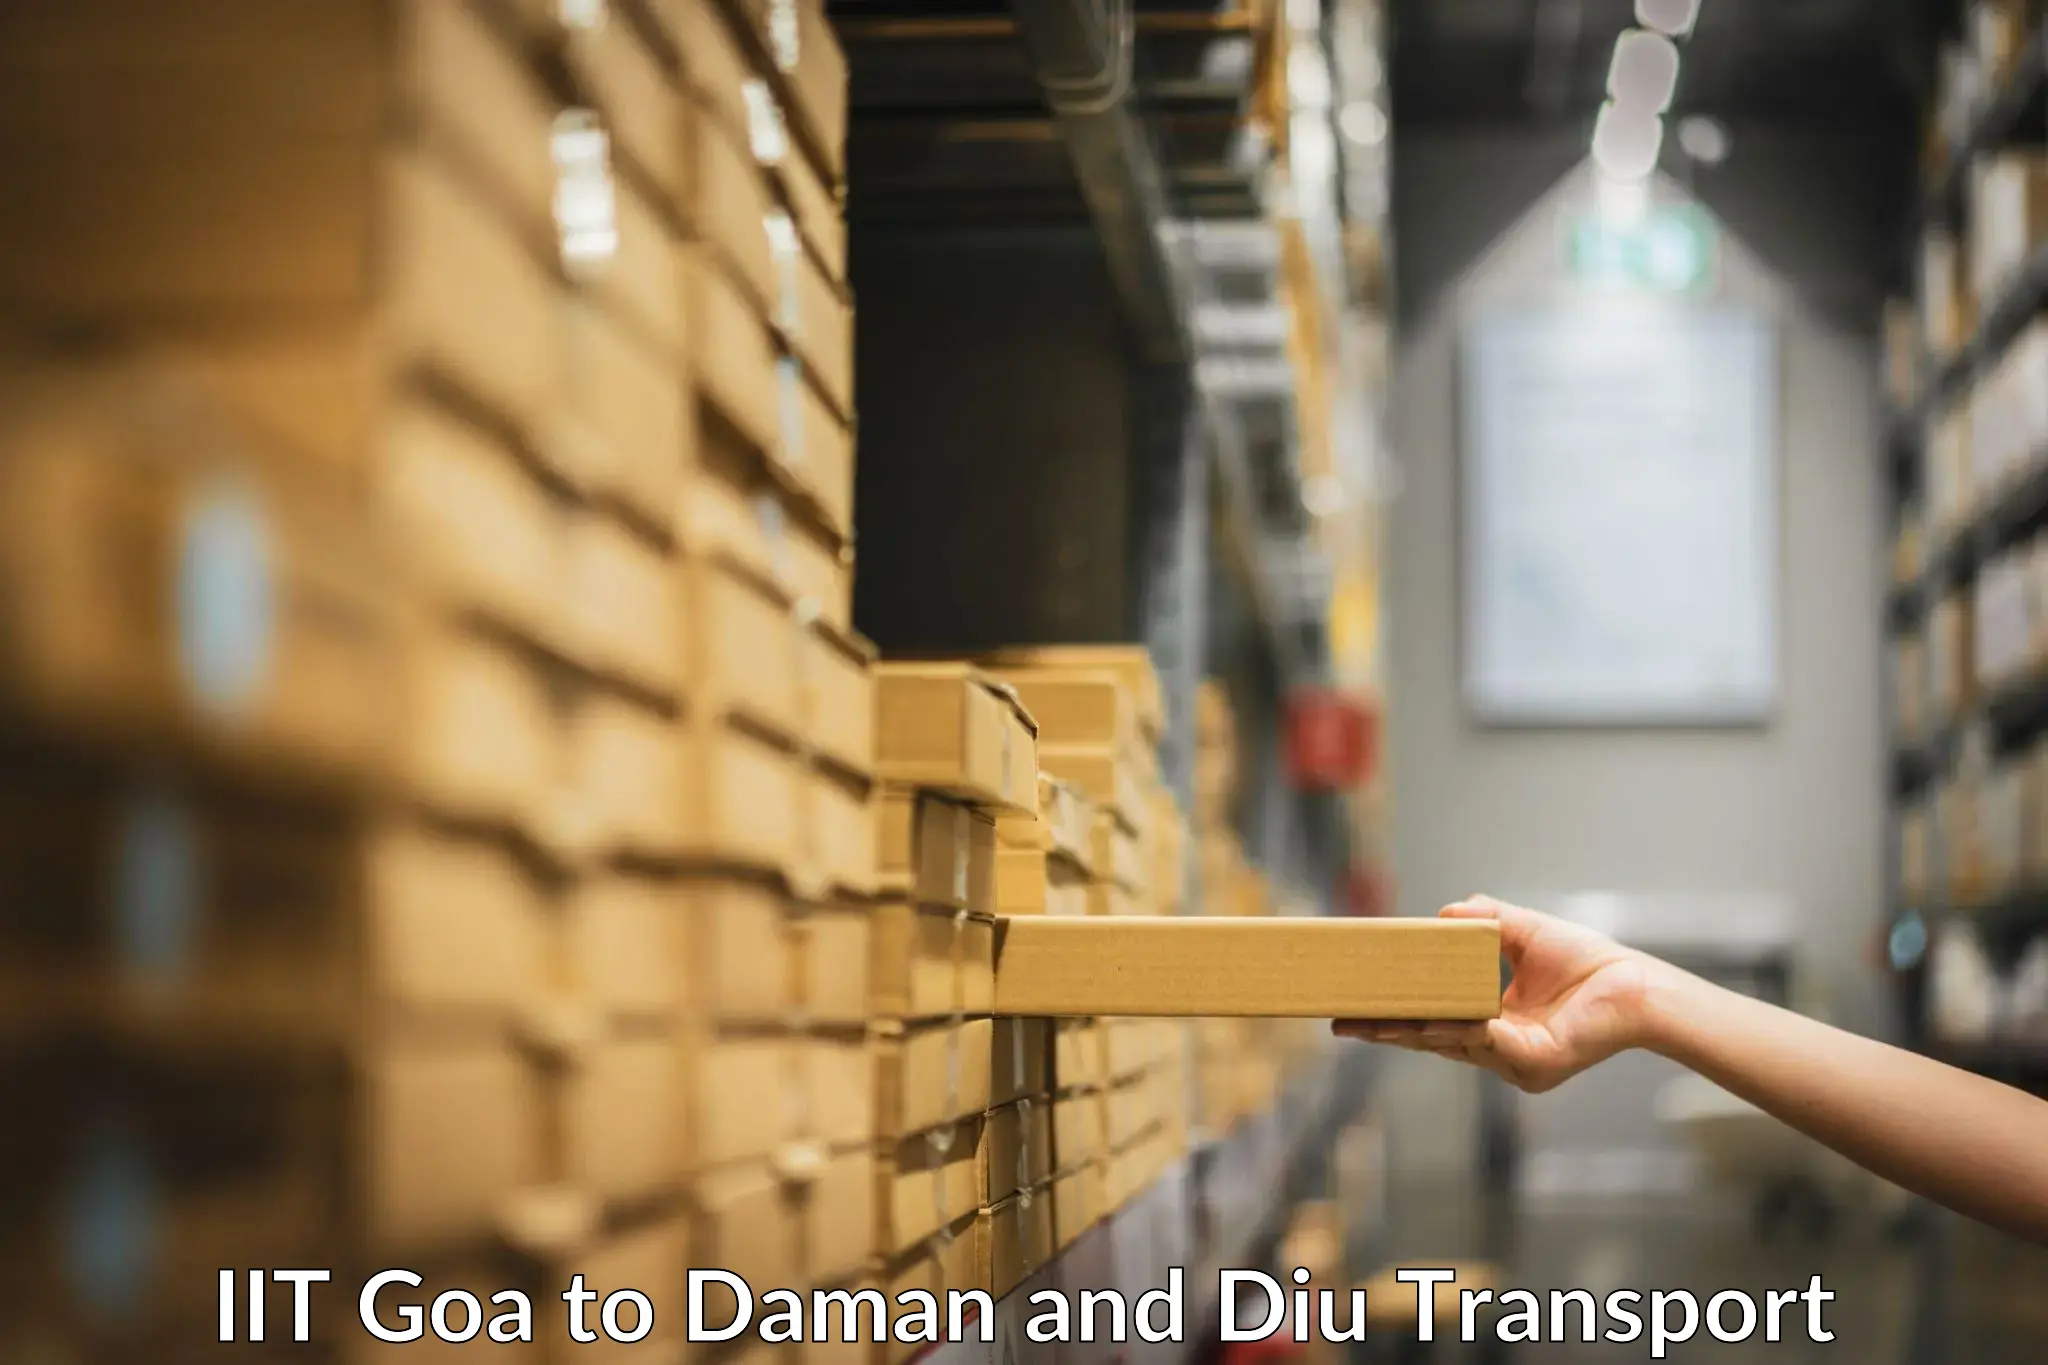 Two wheeler transport services IIT Goa to Daman and Diu